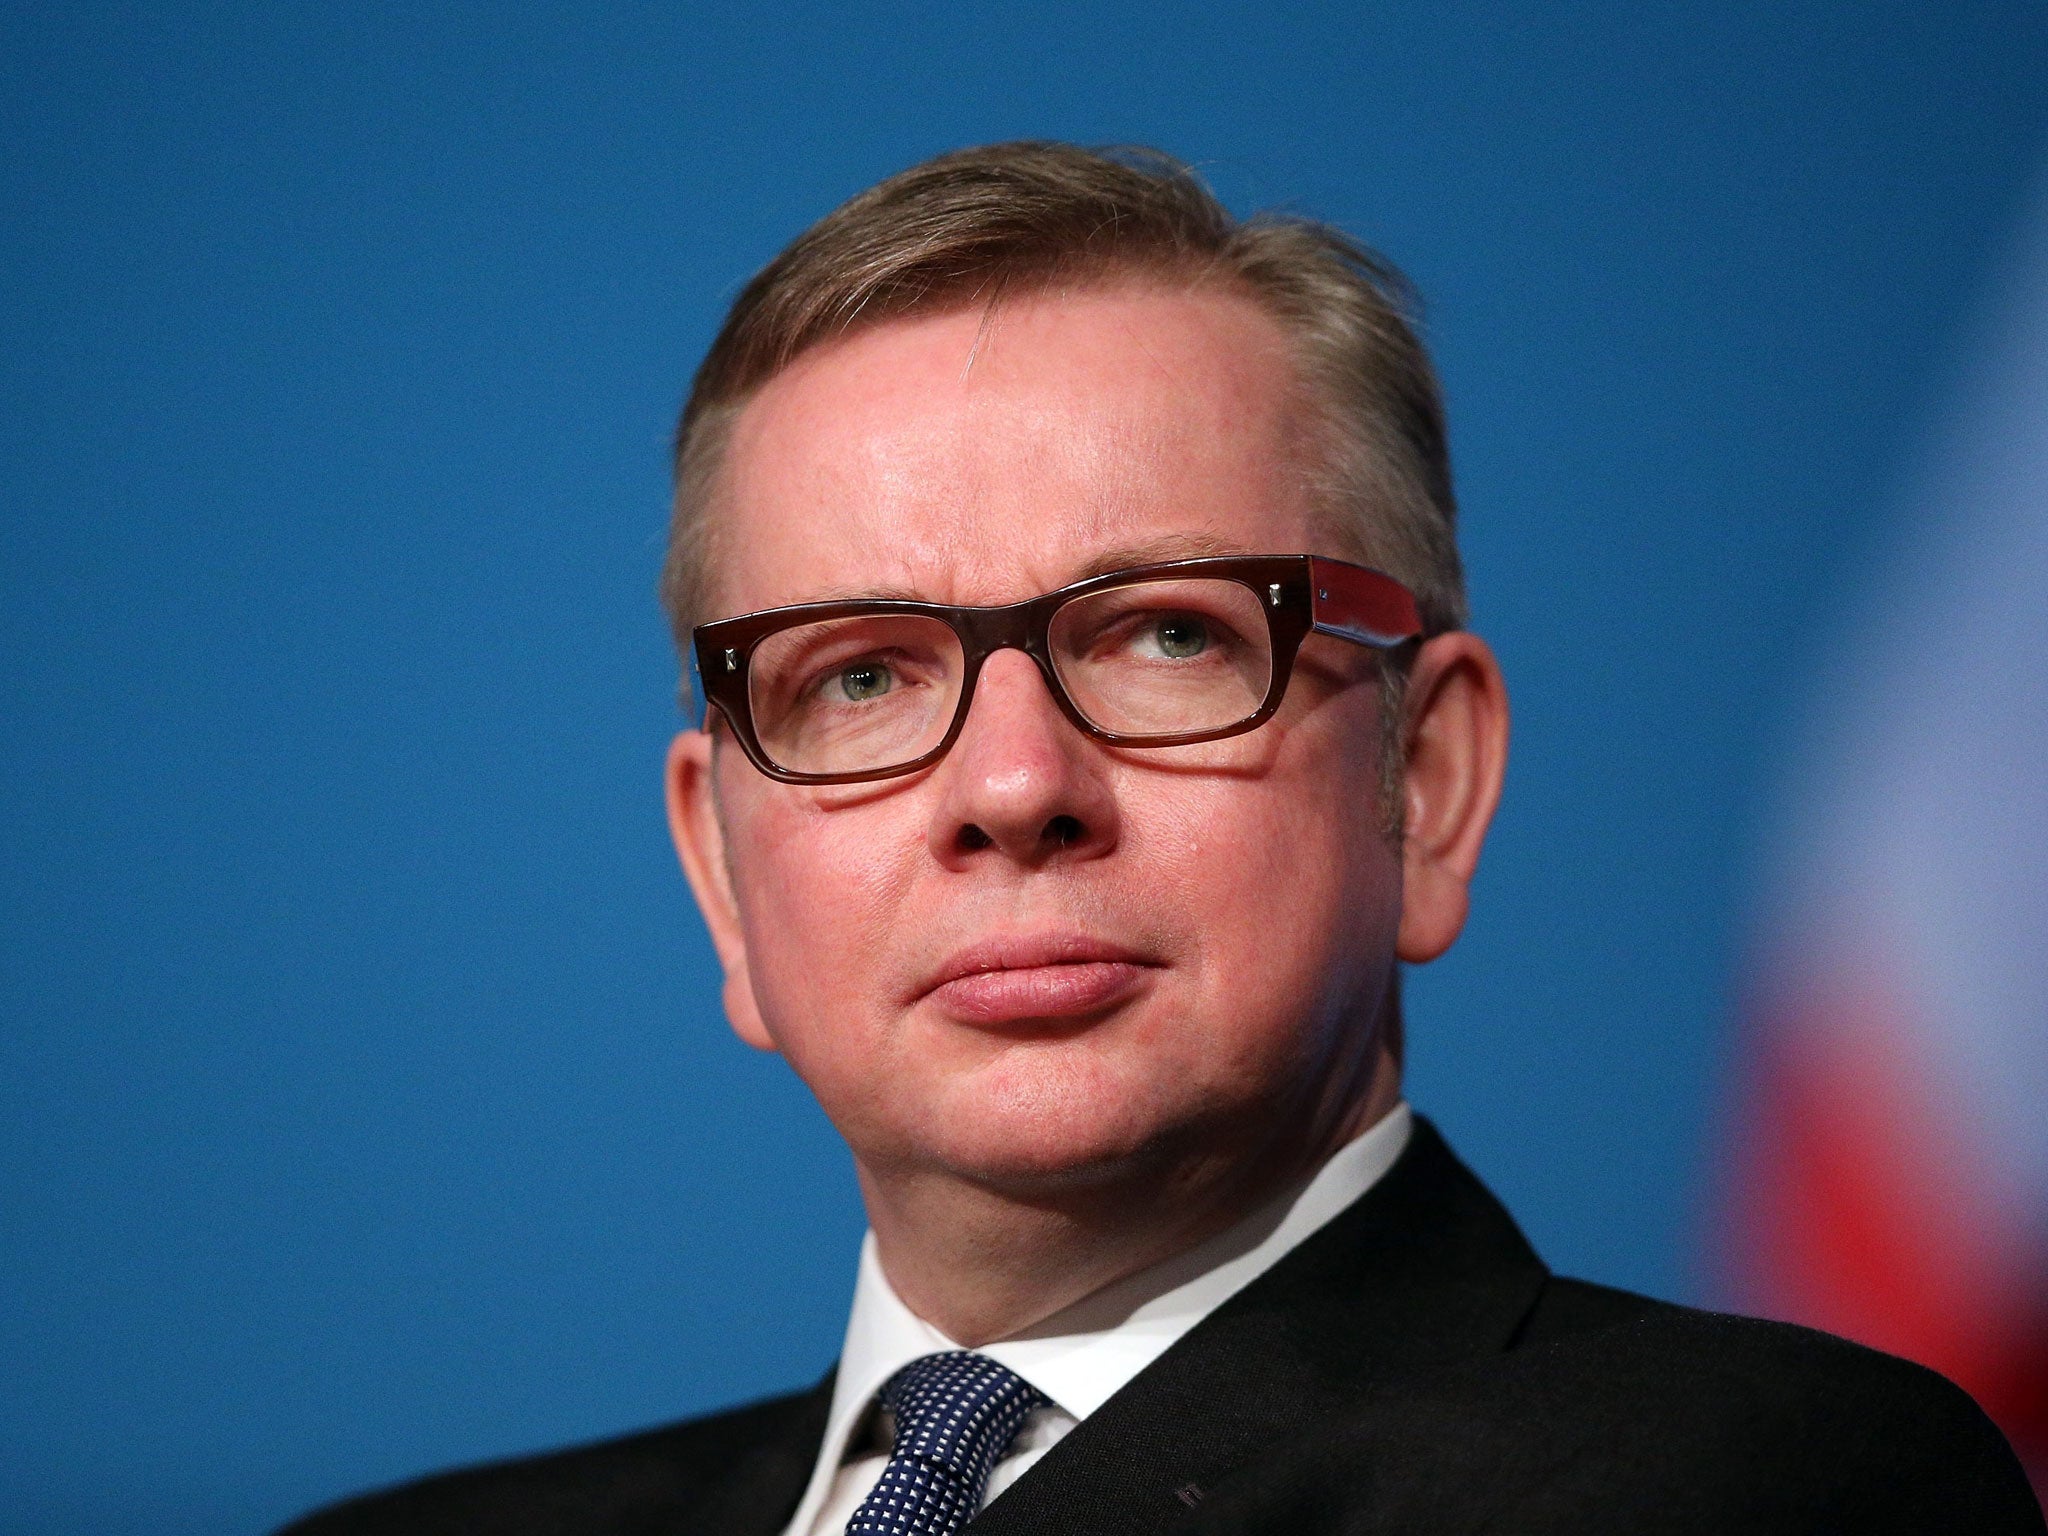 The report's findings are an embarrassment for the Education Secretary, Michael Gove